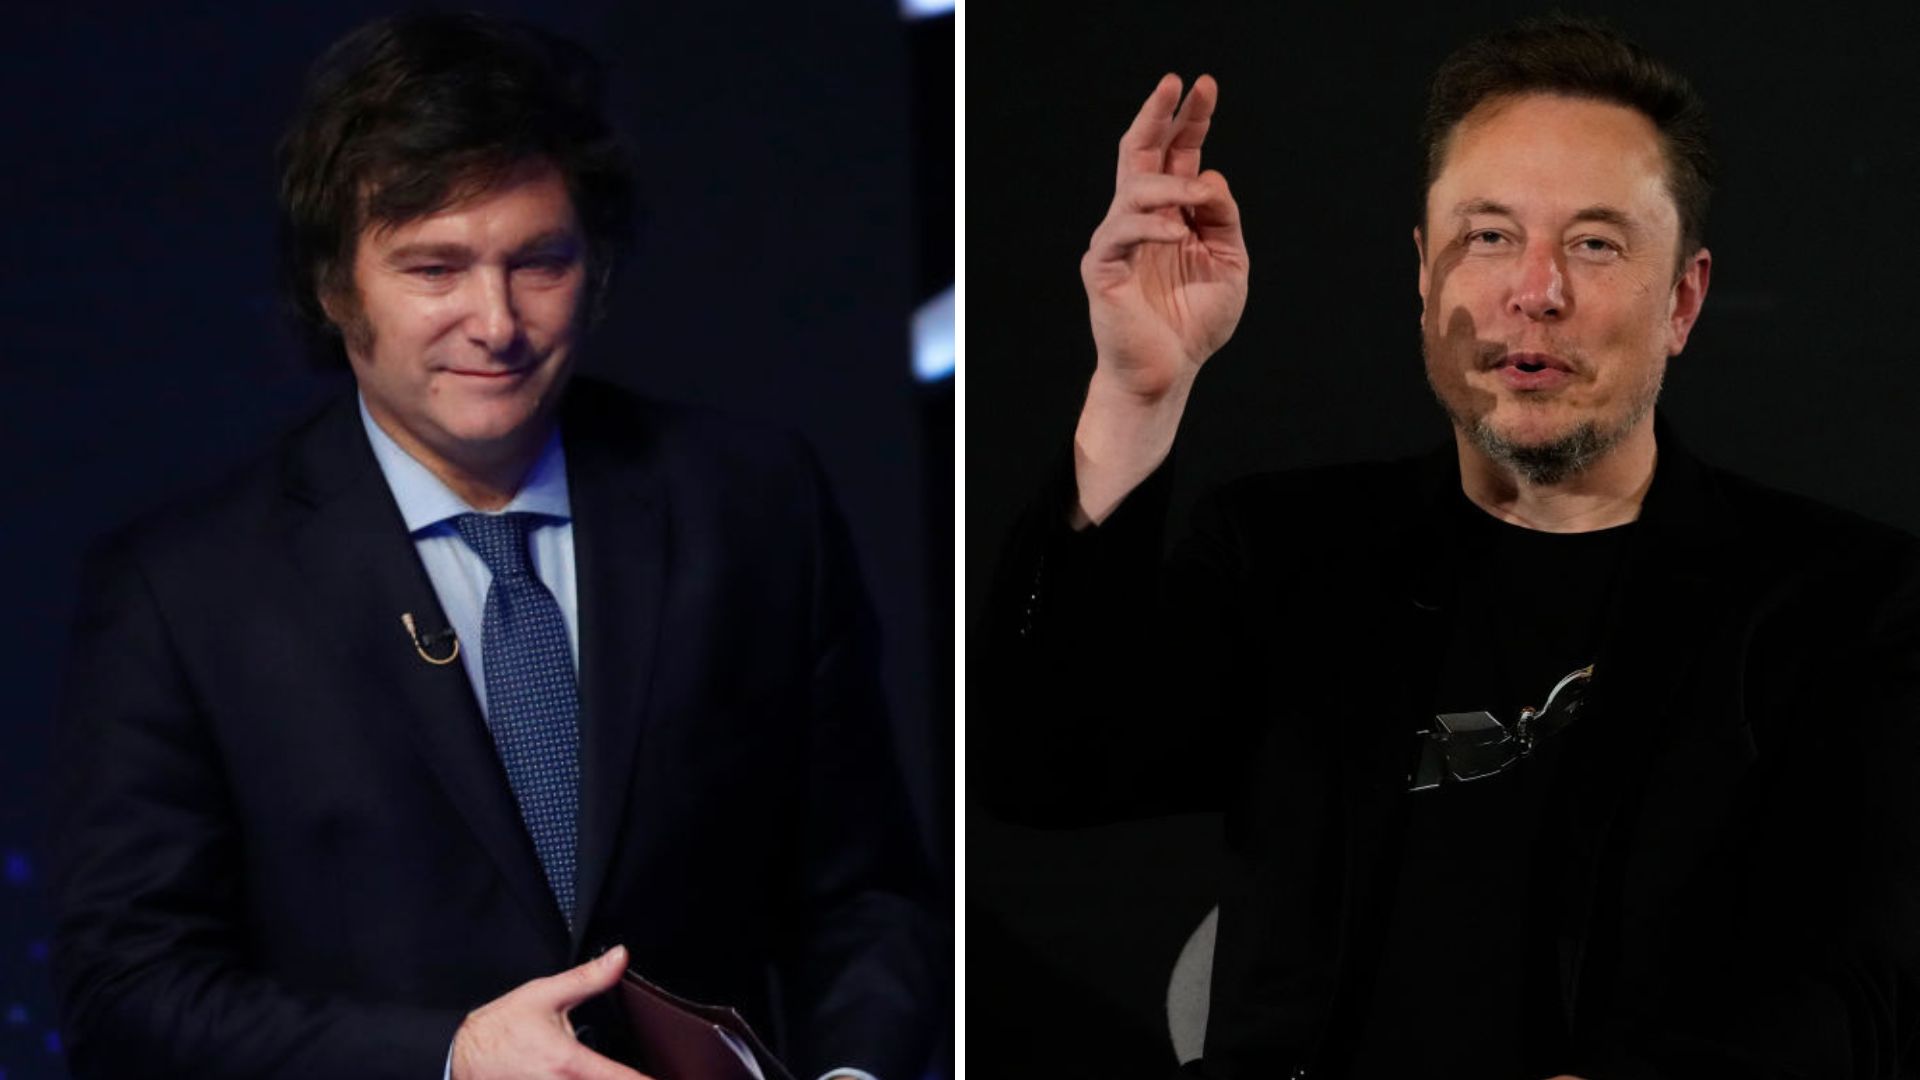 What did Elon Musk say about Xavier Miley’s speech in Davos?